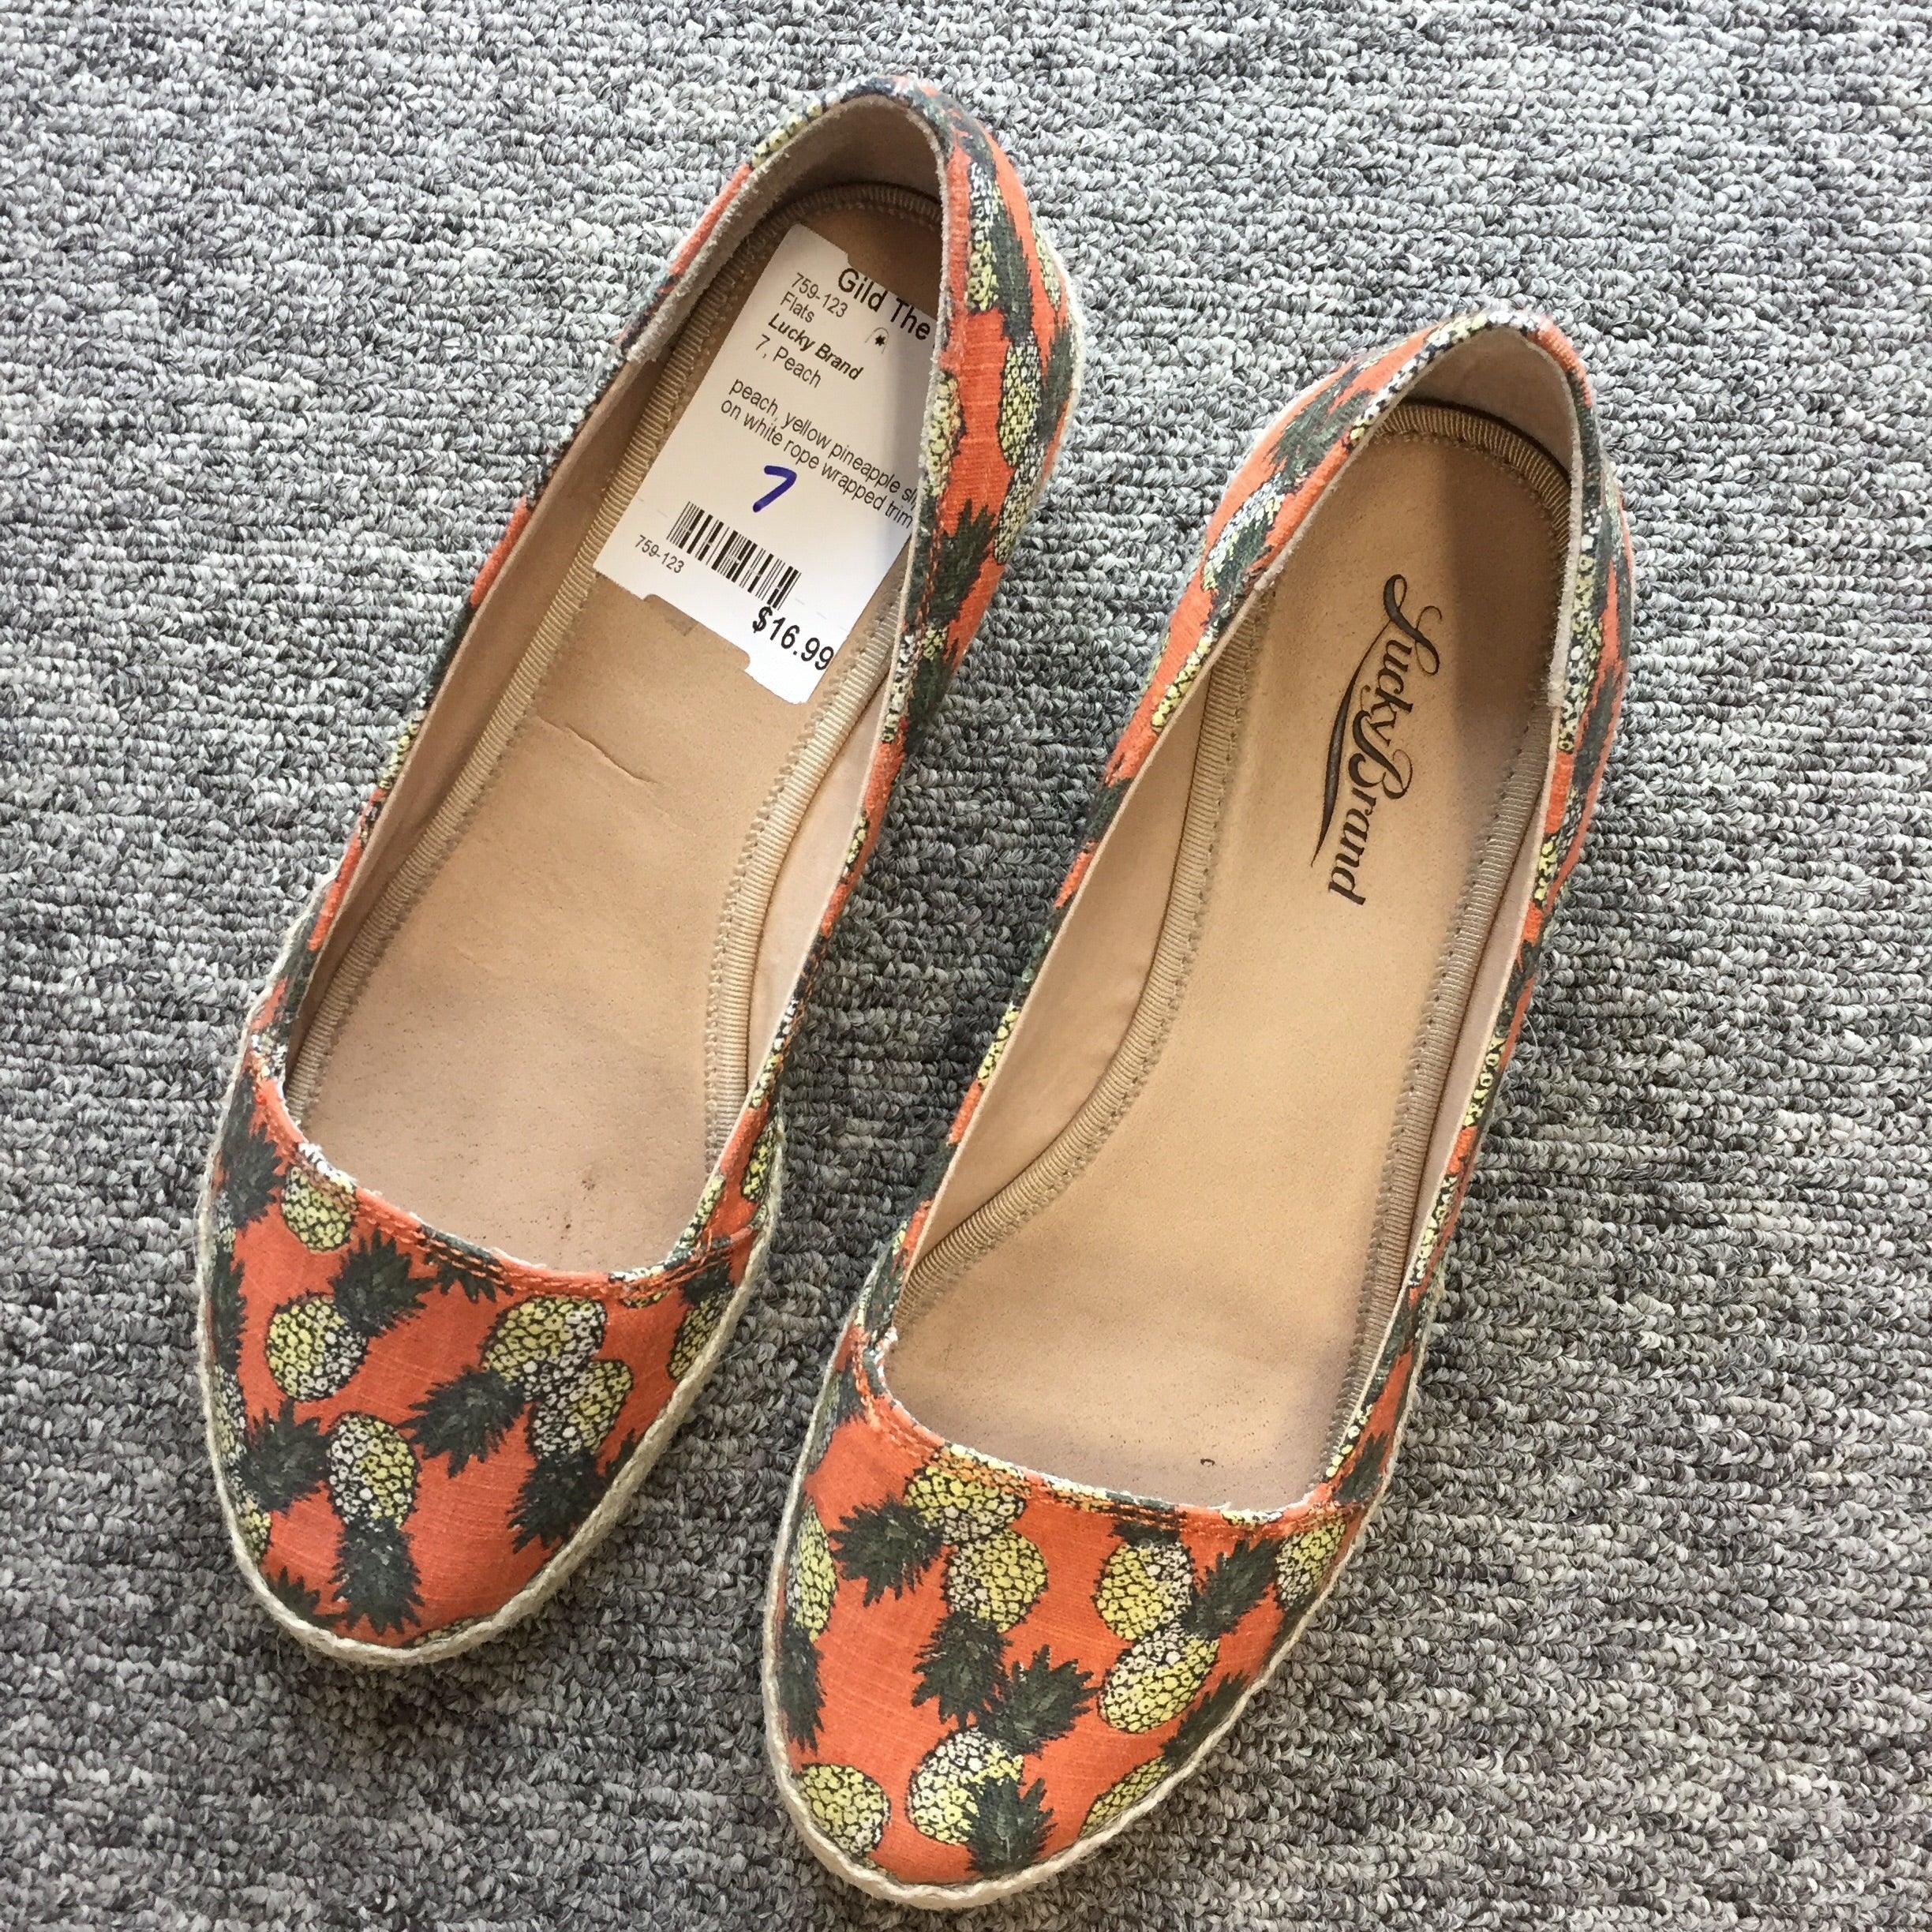 Lucky Brand Pineapple Flats, Size 7 - Gild the Lily